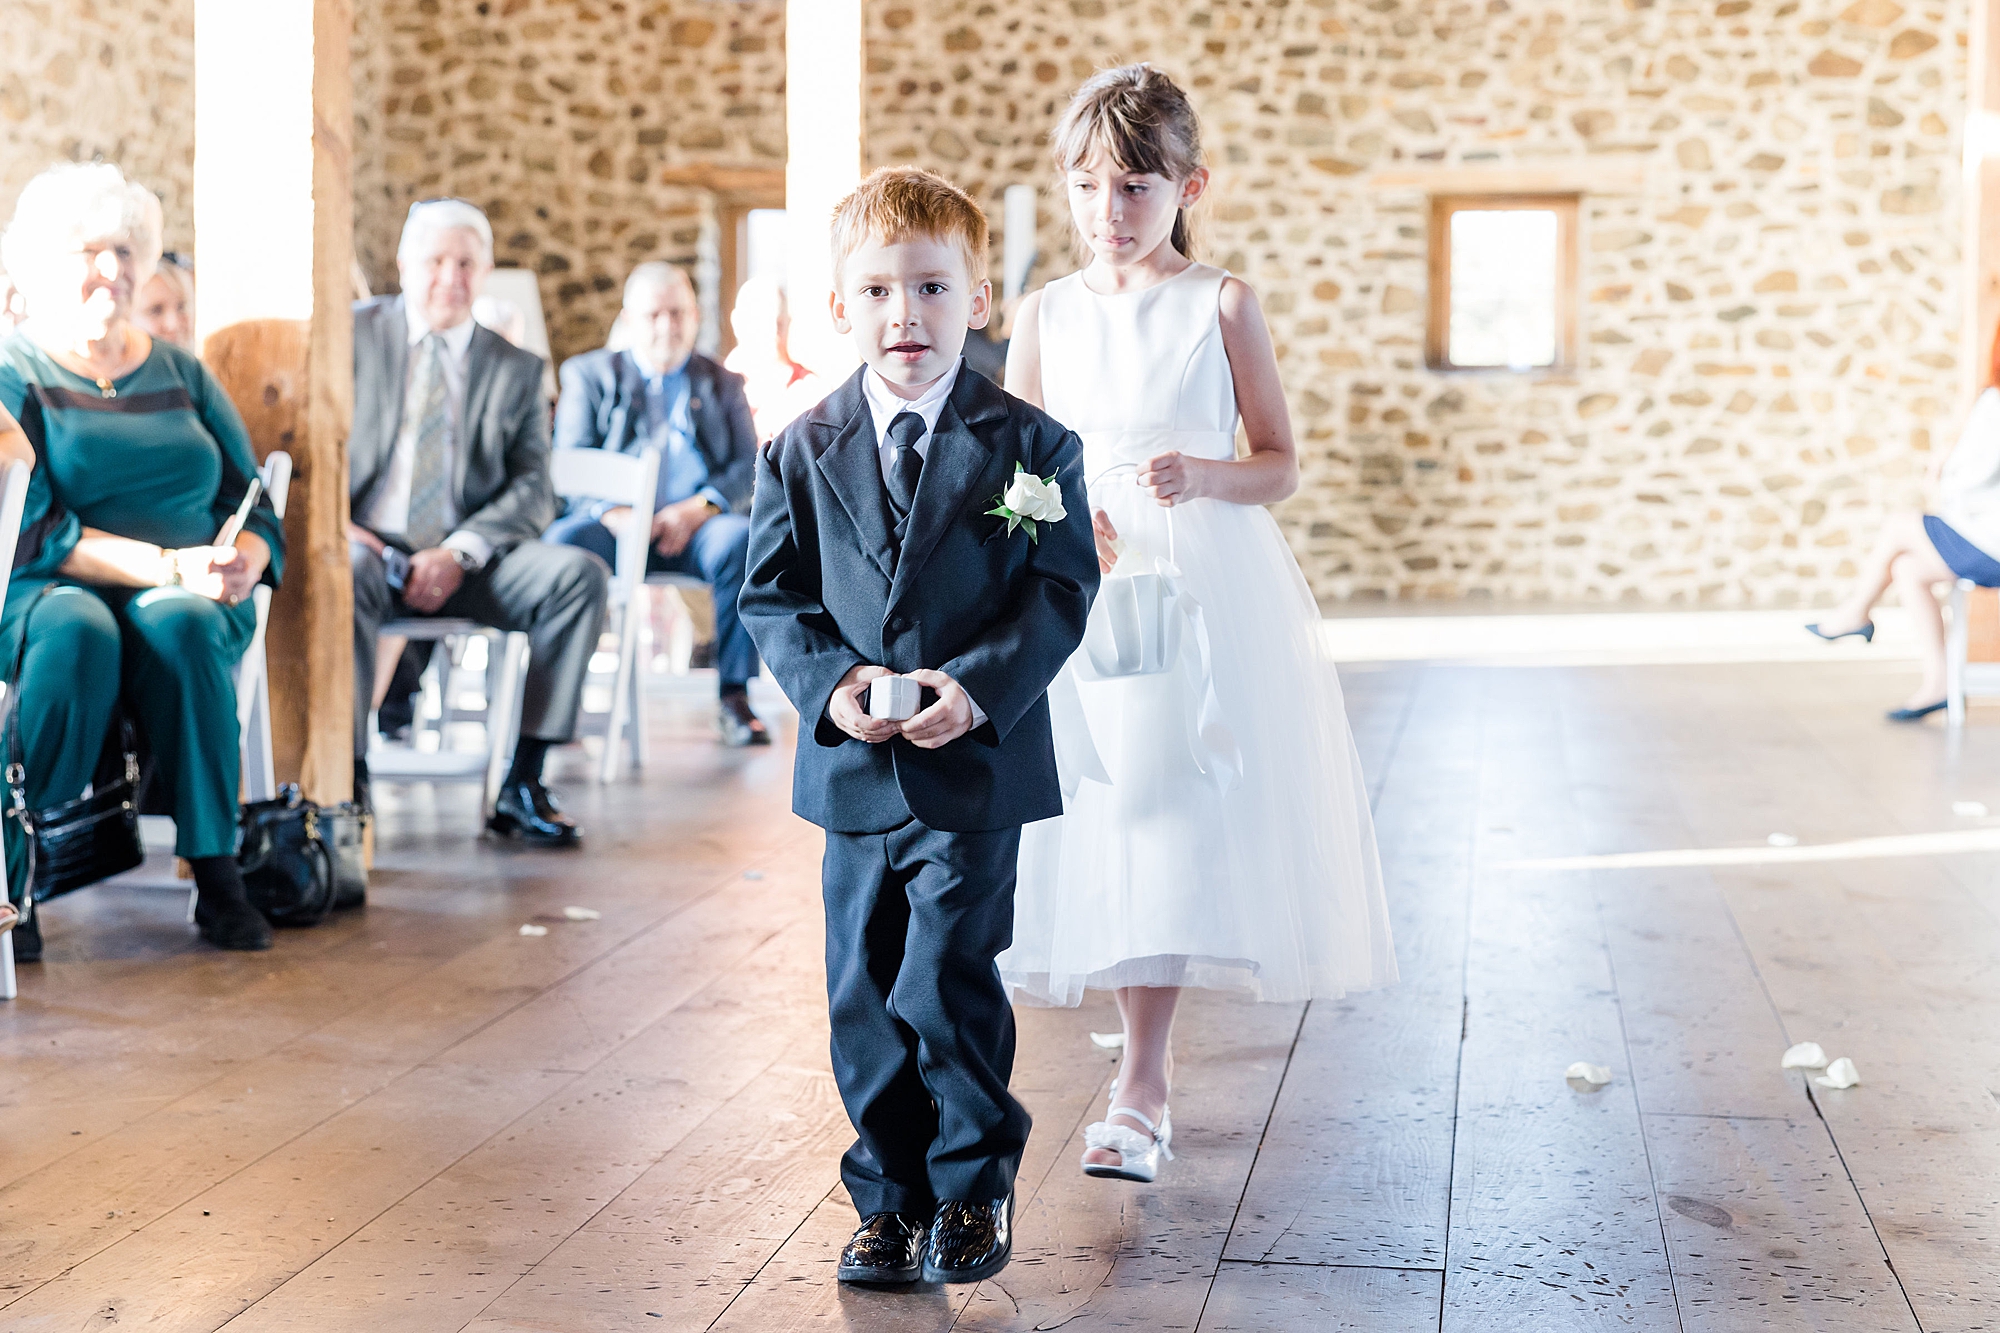 flower girl and ring bearer walking down aisle at wedding ceremony